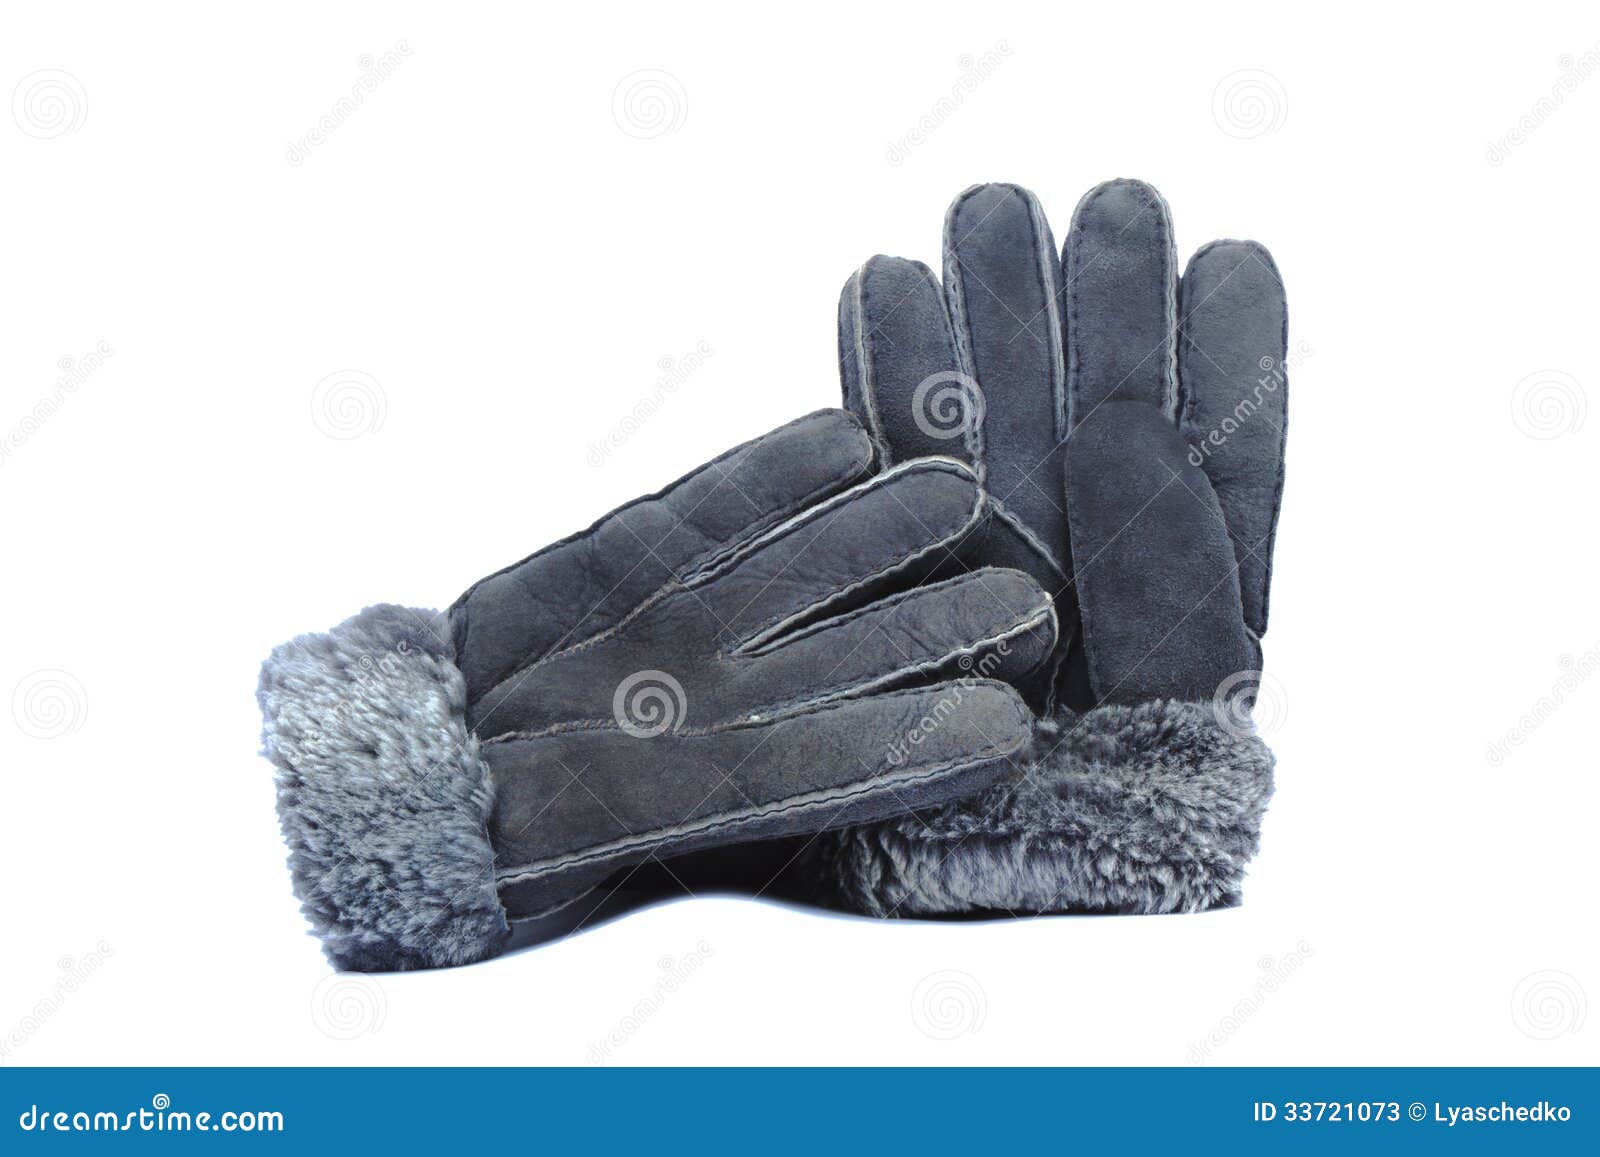 Fur Winter Gloves Grey Colors On The White Background. Stock Image - Image of subject ...1300 x 957